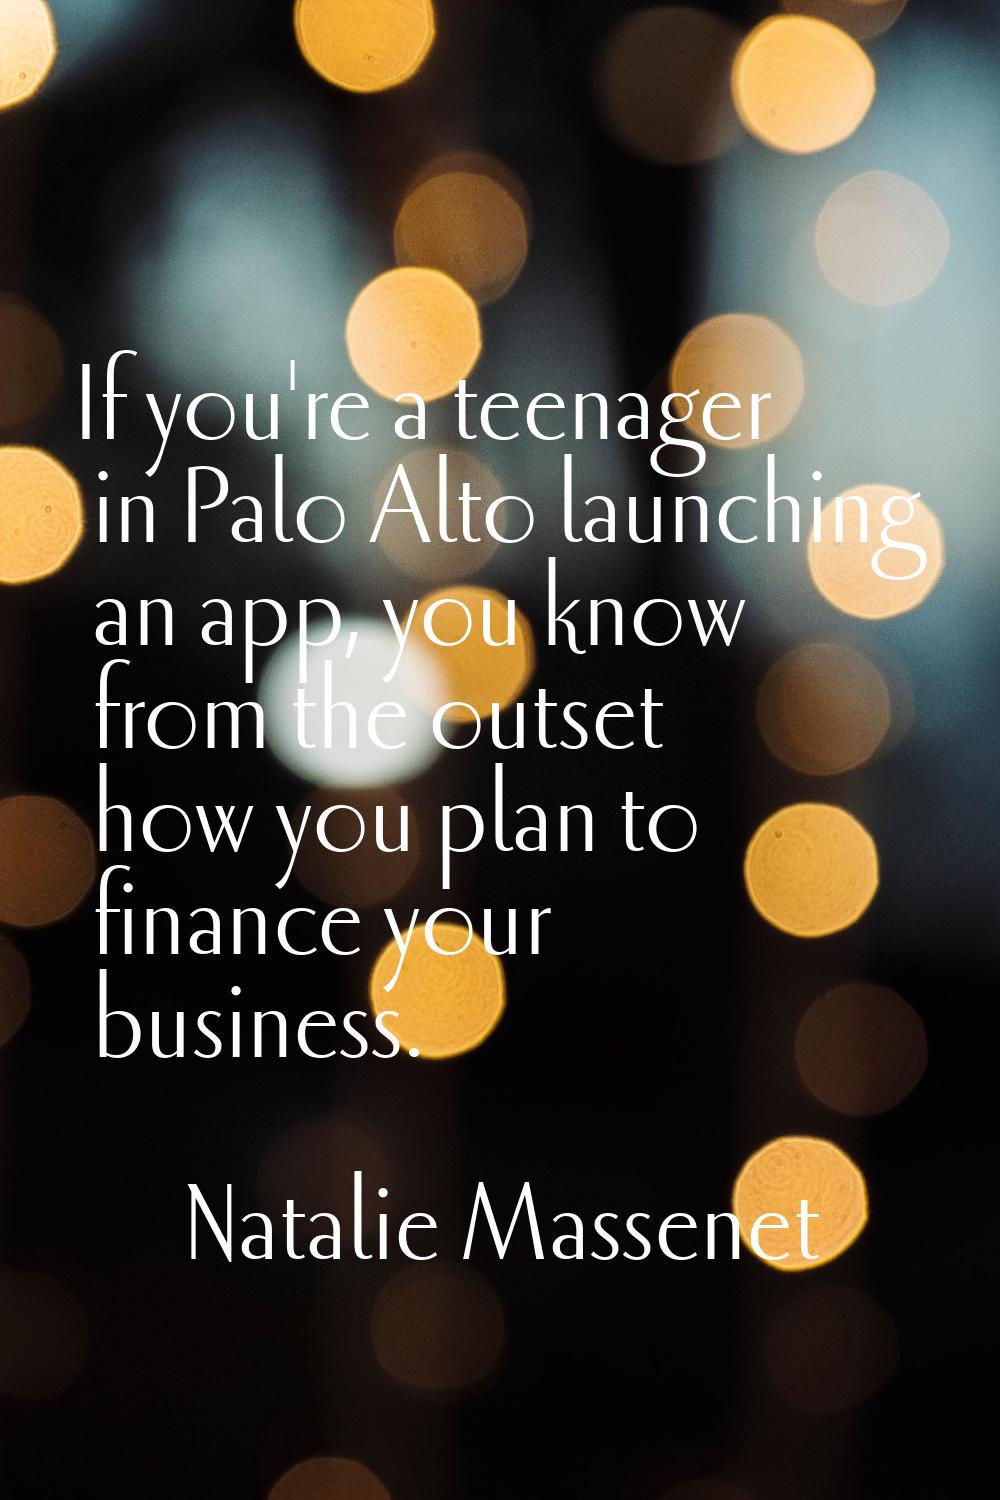 If you're a teenager in Palo Alto launching an app, you know from the outset how you plan to financ